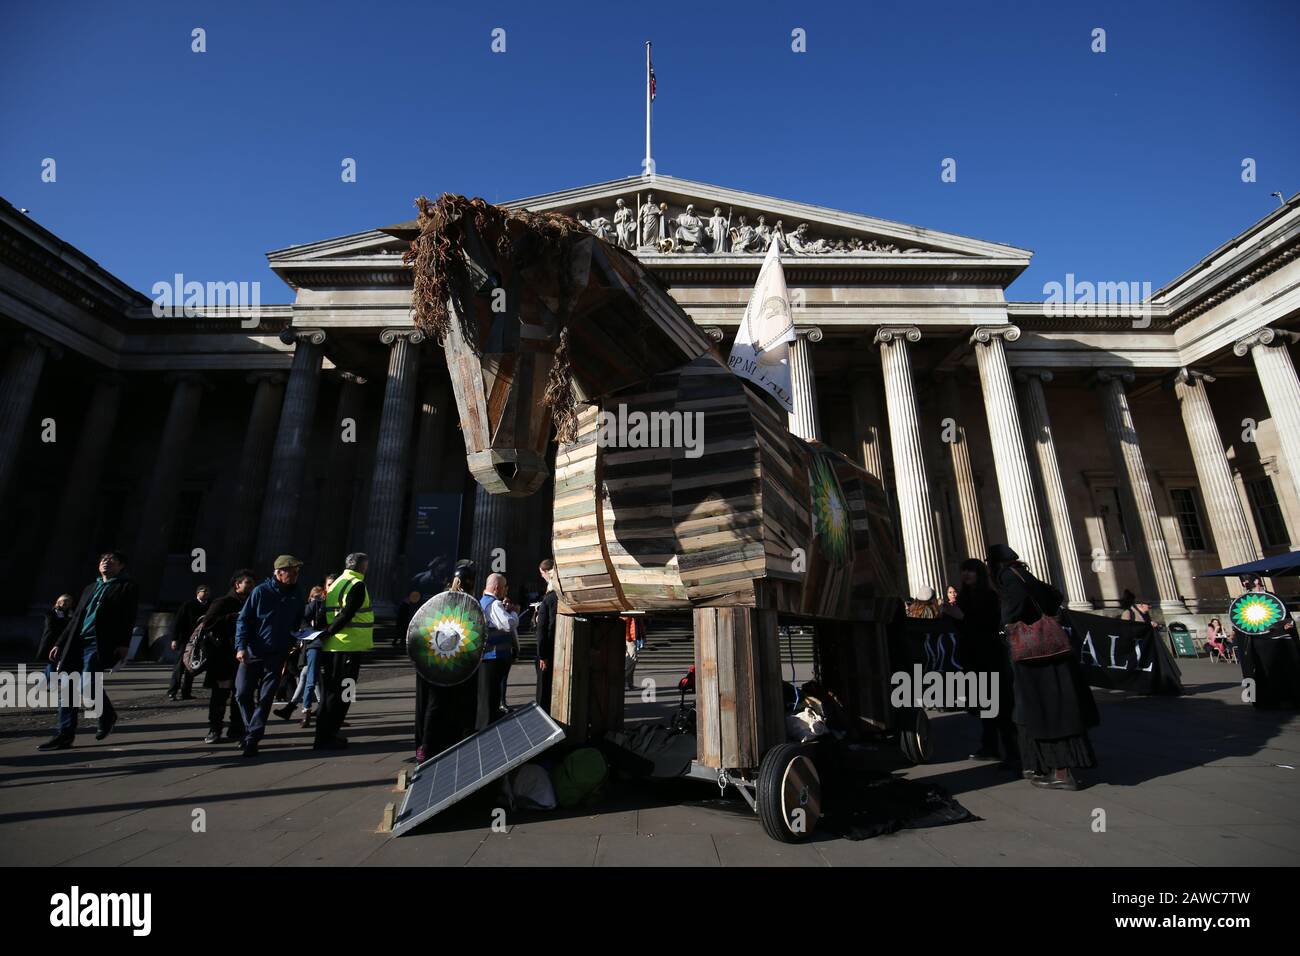 A Trojan horse, placed by activists, dressed as Greek soldiers, in front of the British Museum, London in protest against BP, who are sponsoring the Troy exhibition at the museum. Stock Photo